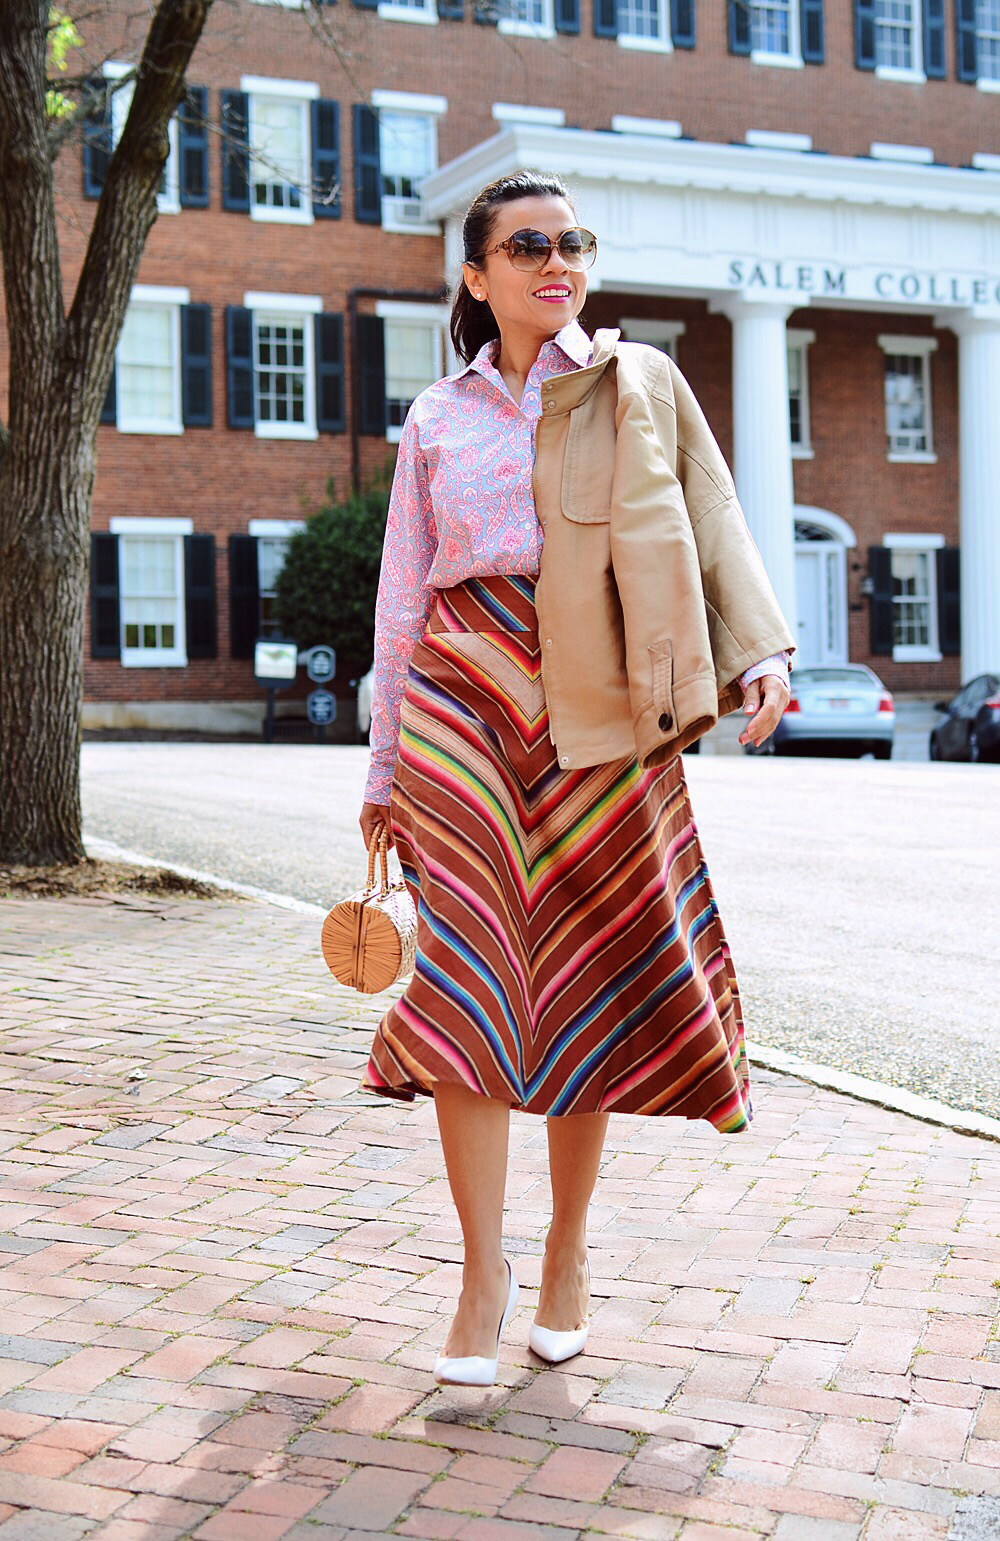 Mixed Patterns: Preppy And Ethnic | MY SMALL WARDROBE